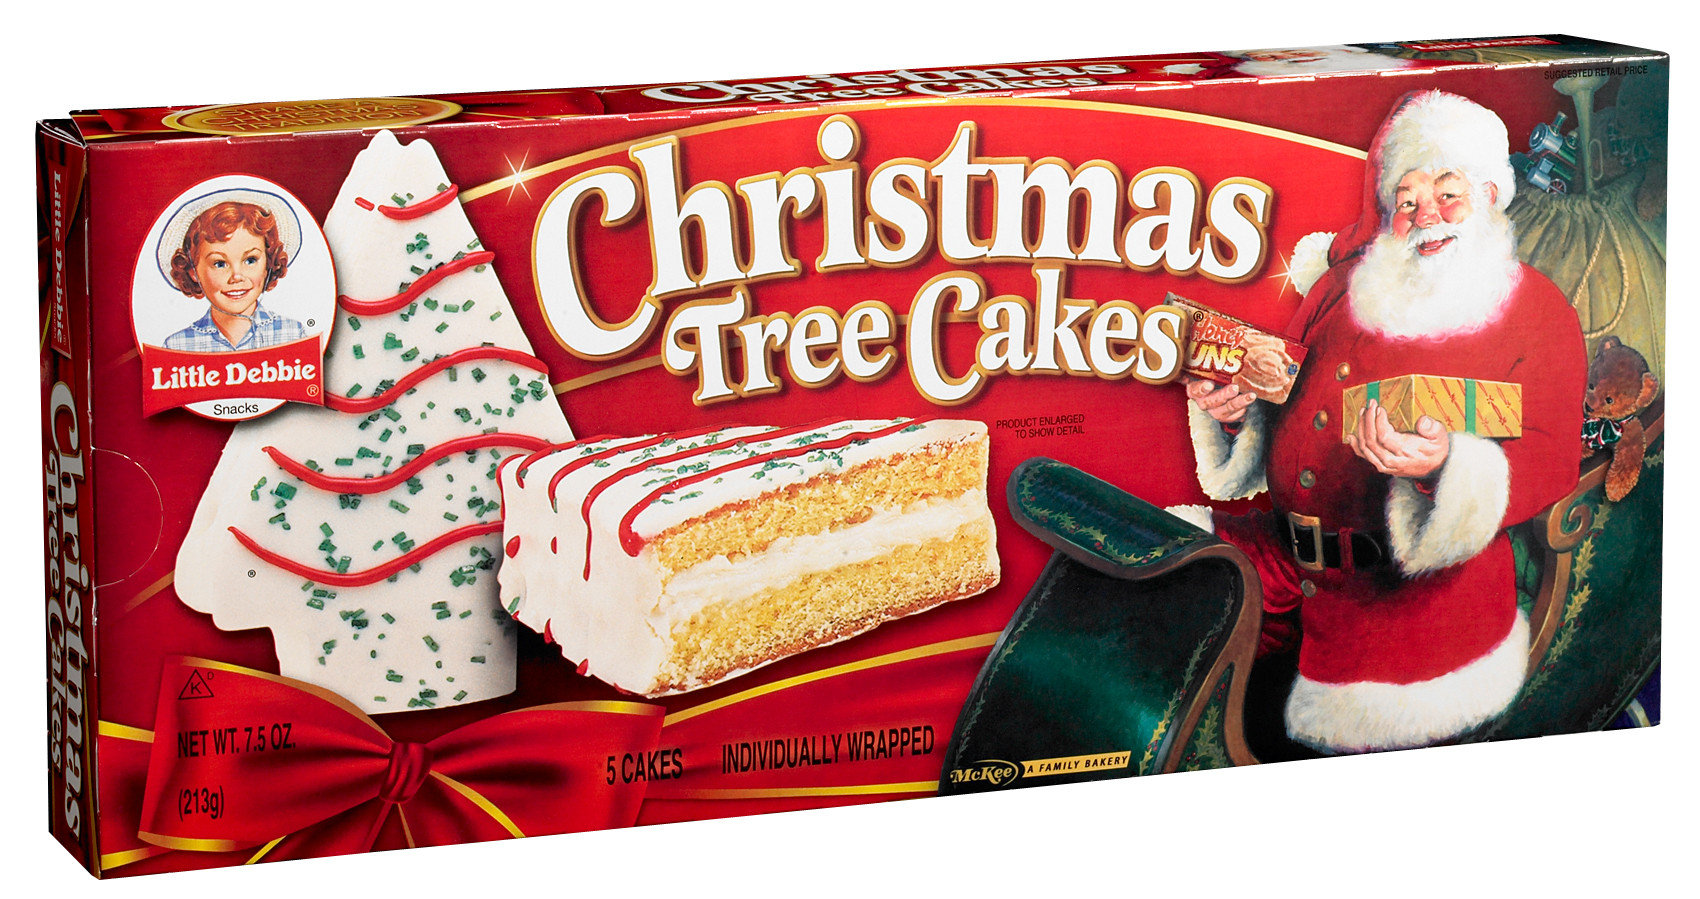 21 Ideas for Christmas Tree Cakes Little Debbie - Best Diet and Healthy Recipes Ever | Recipes ...